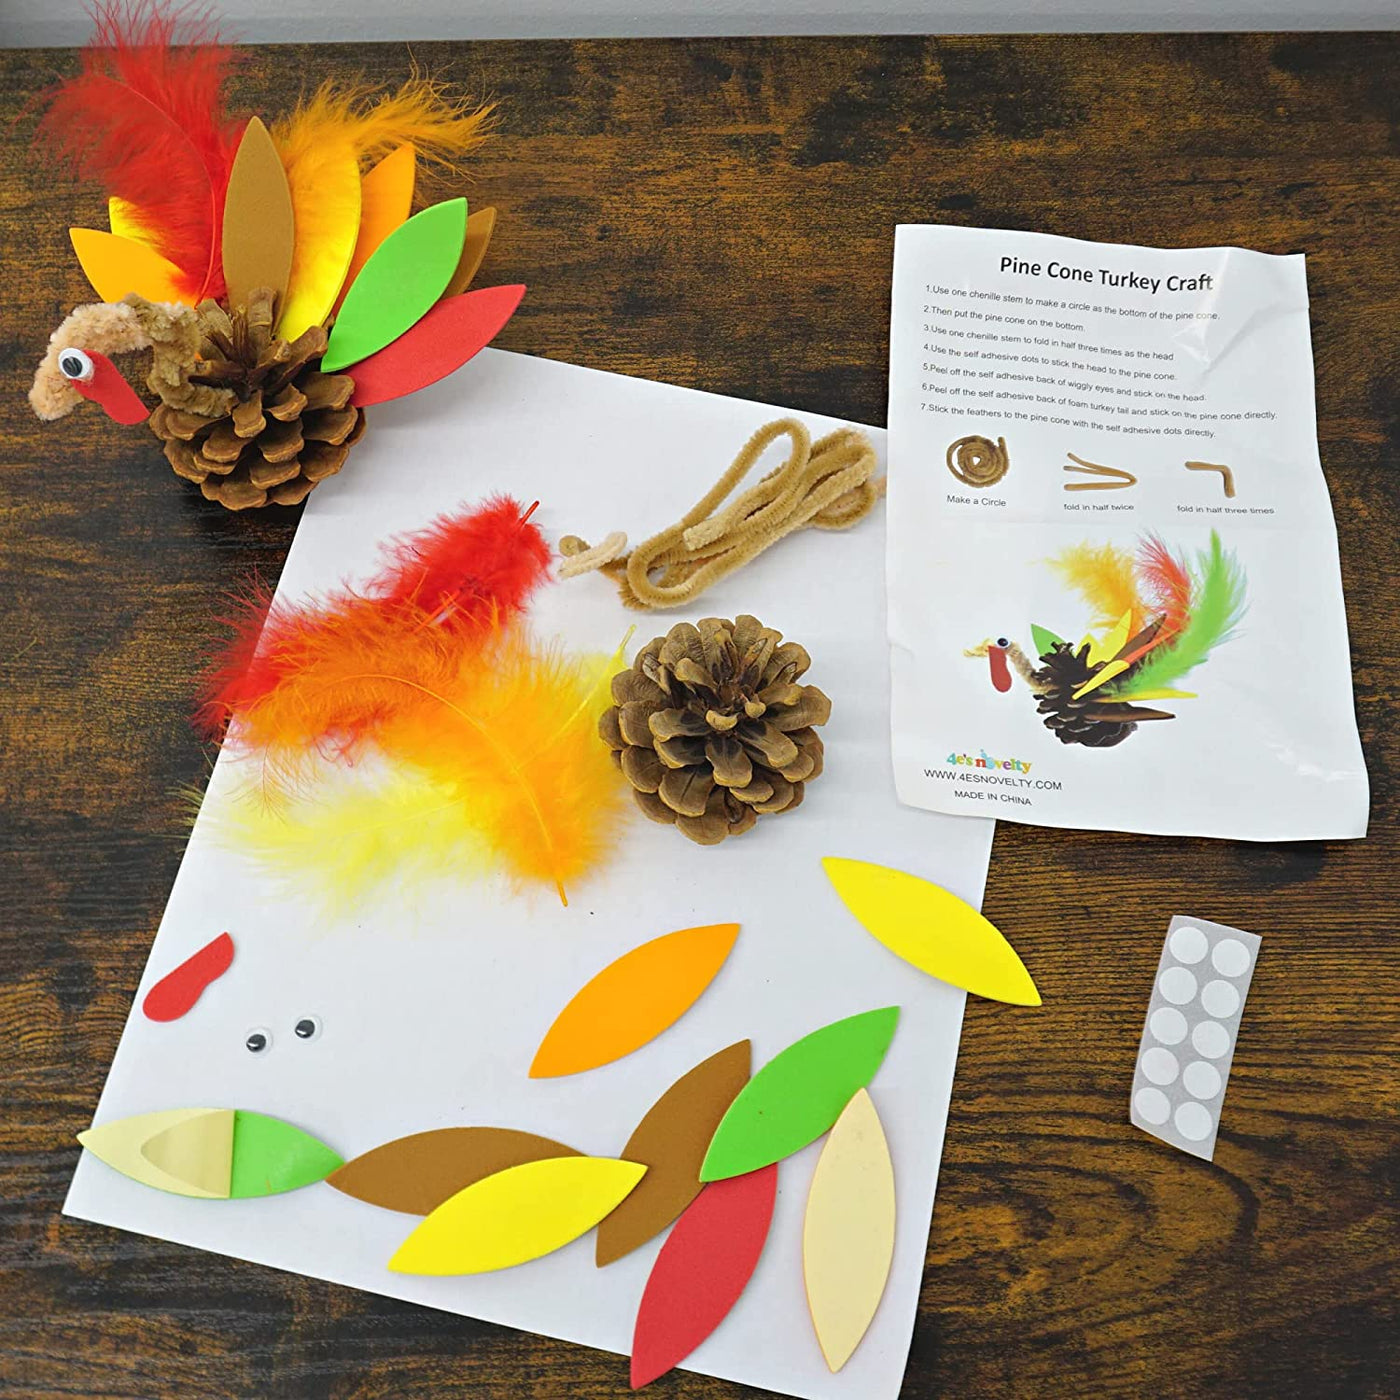 4E's Novelty Pinecone Turkey Craft Kit (12 Pack) DIY Thanksgiving Crafts for Kids , Teens, Adults, Thanksgiving Dinner Activity, Classroom Project, Table Centerpiece Decorations